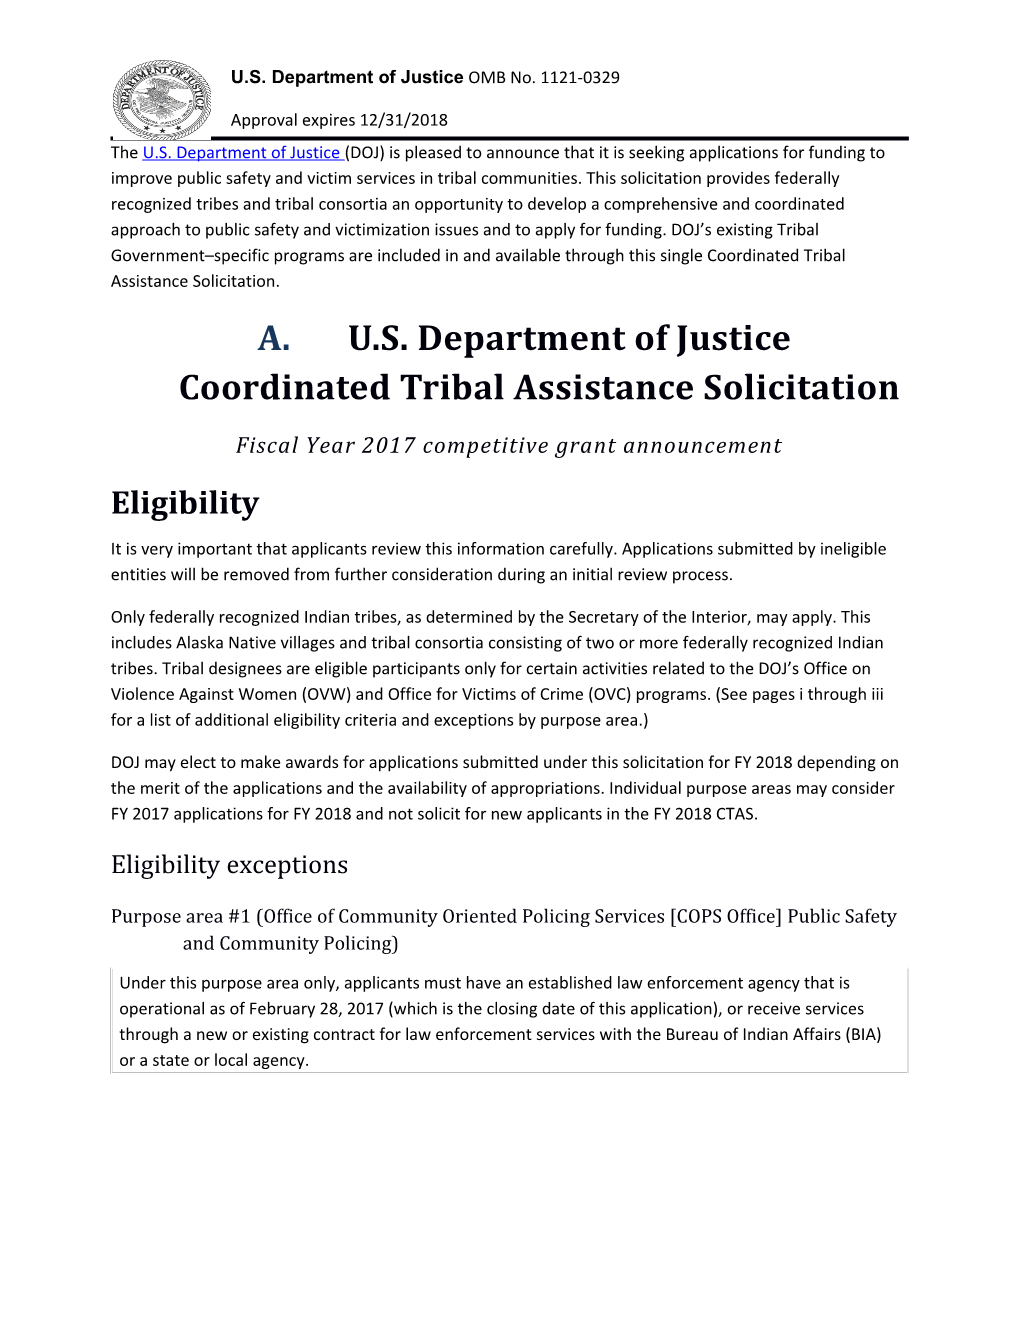 U.S. Department of Justicecoordinated Tribal Assistance Solicitation